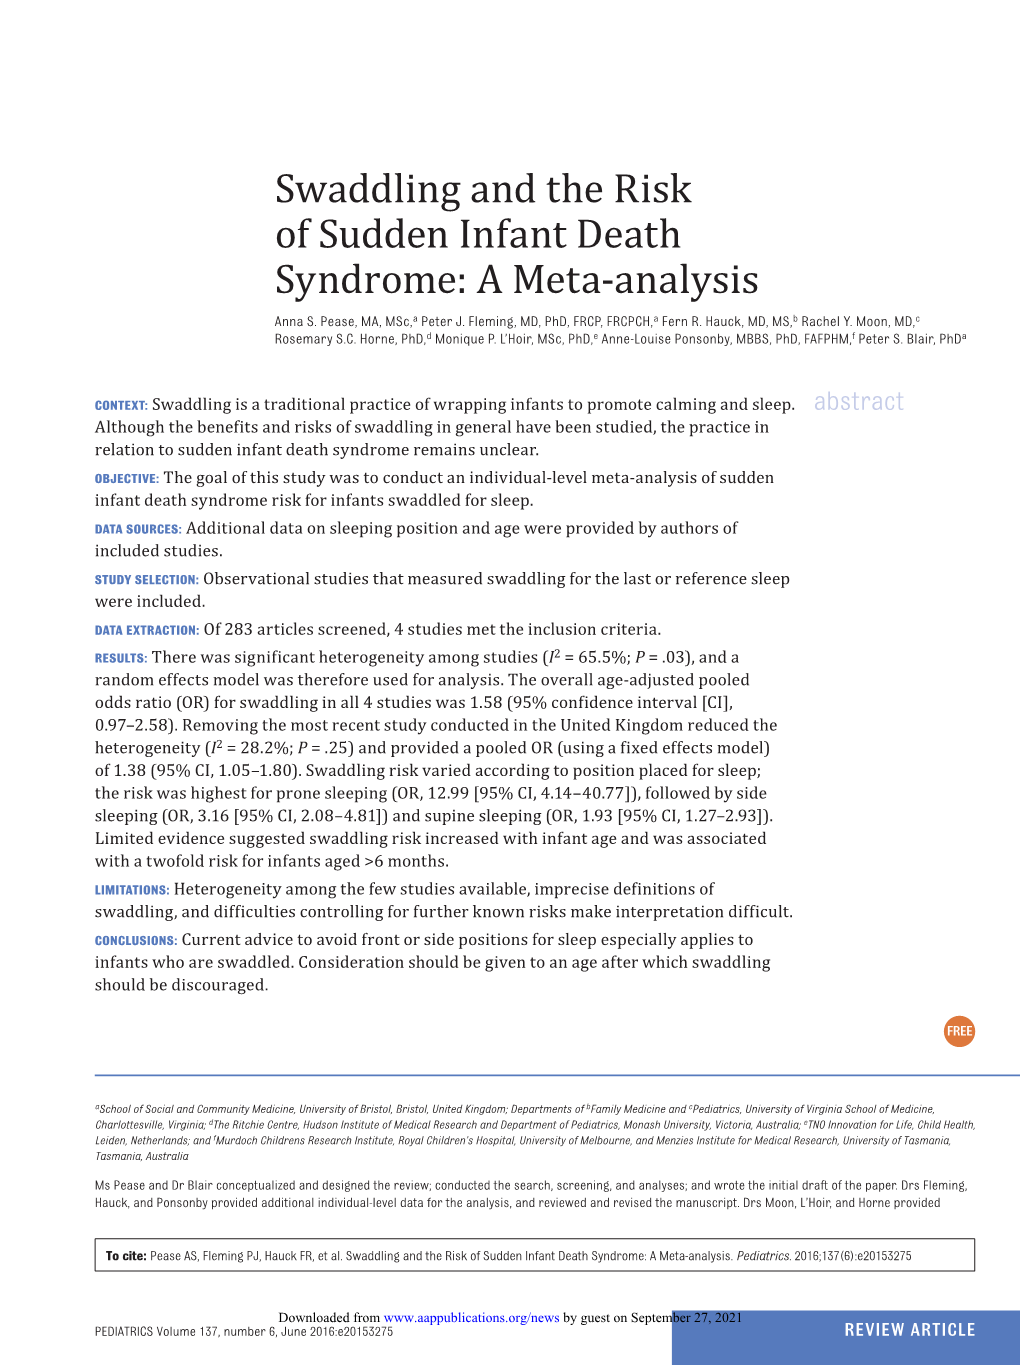 Swaddling and the Risk of Sudden Infant Death Syndrome: a Meta-Analysis Anna S